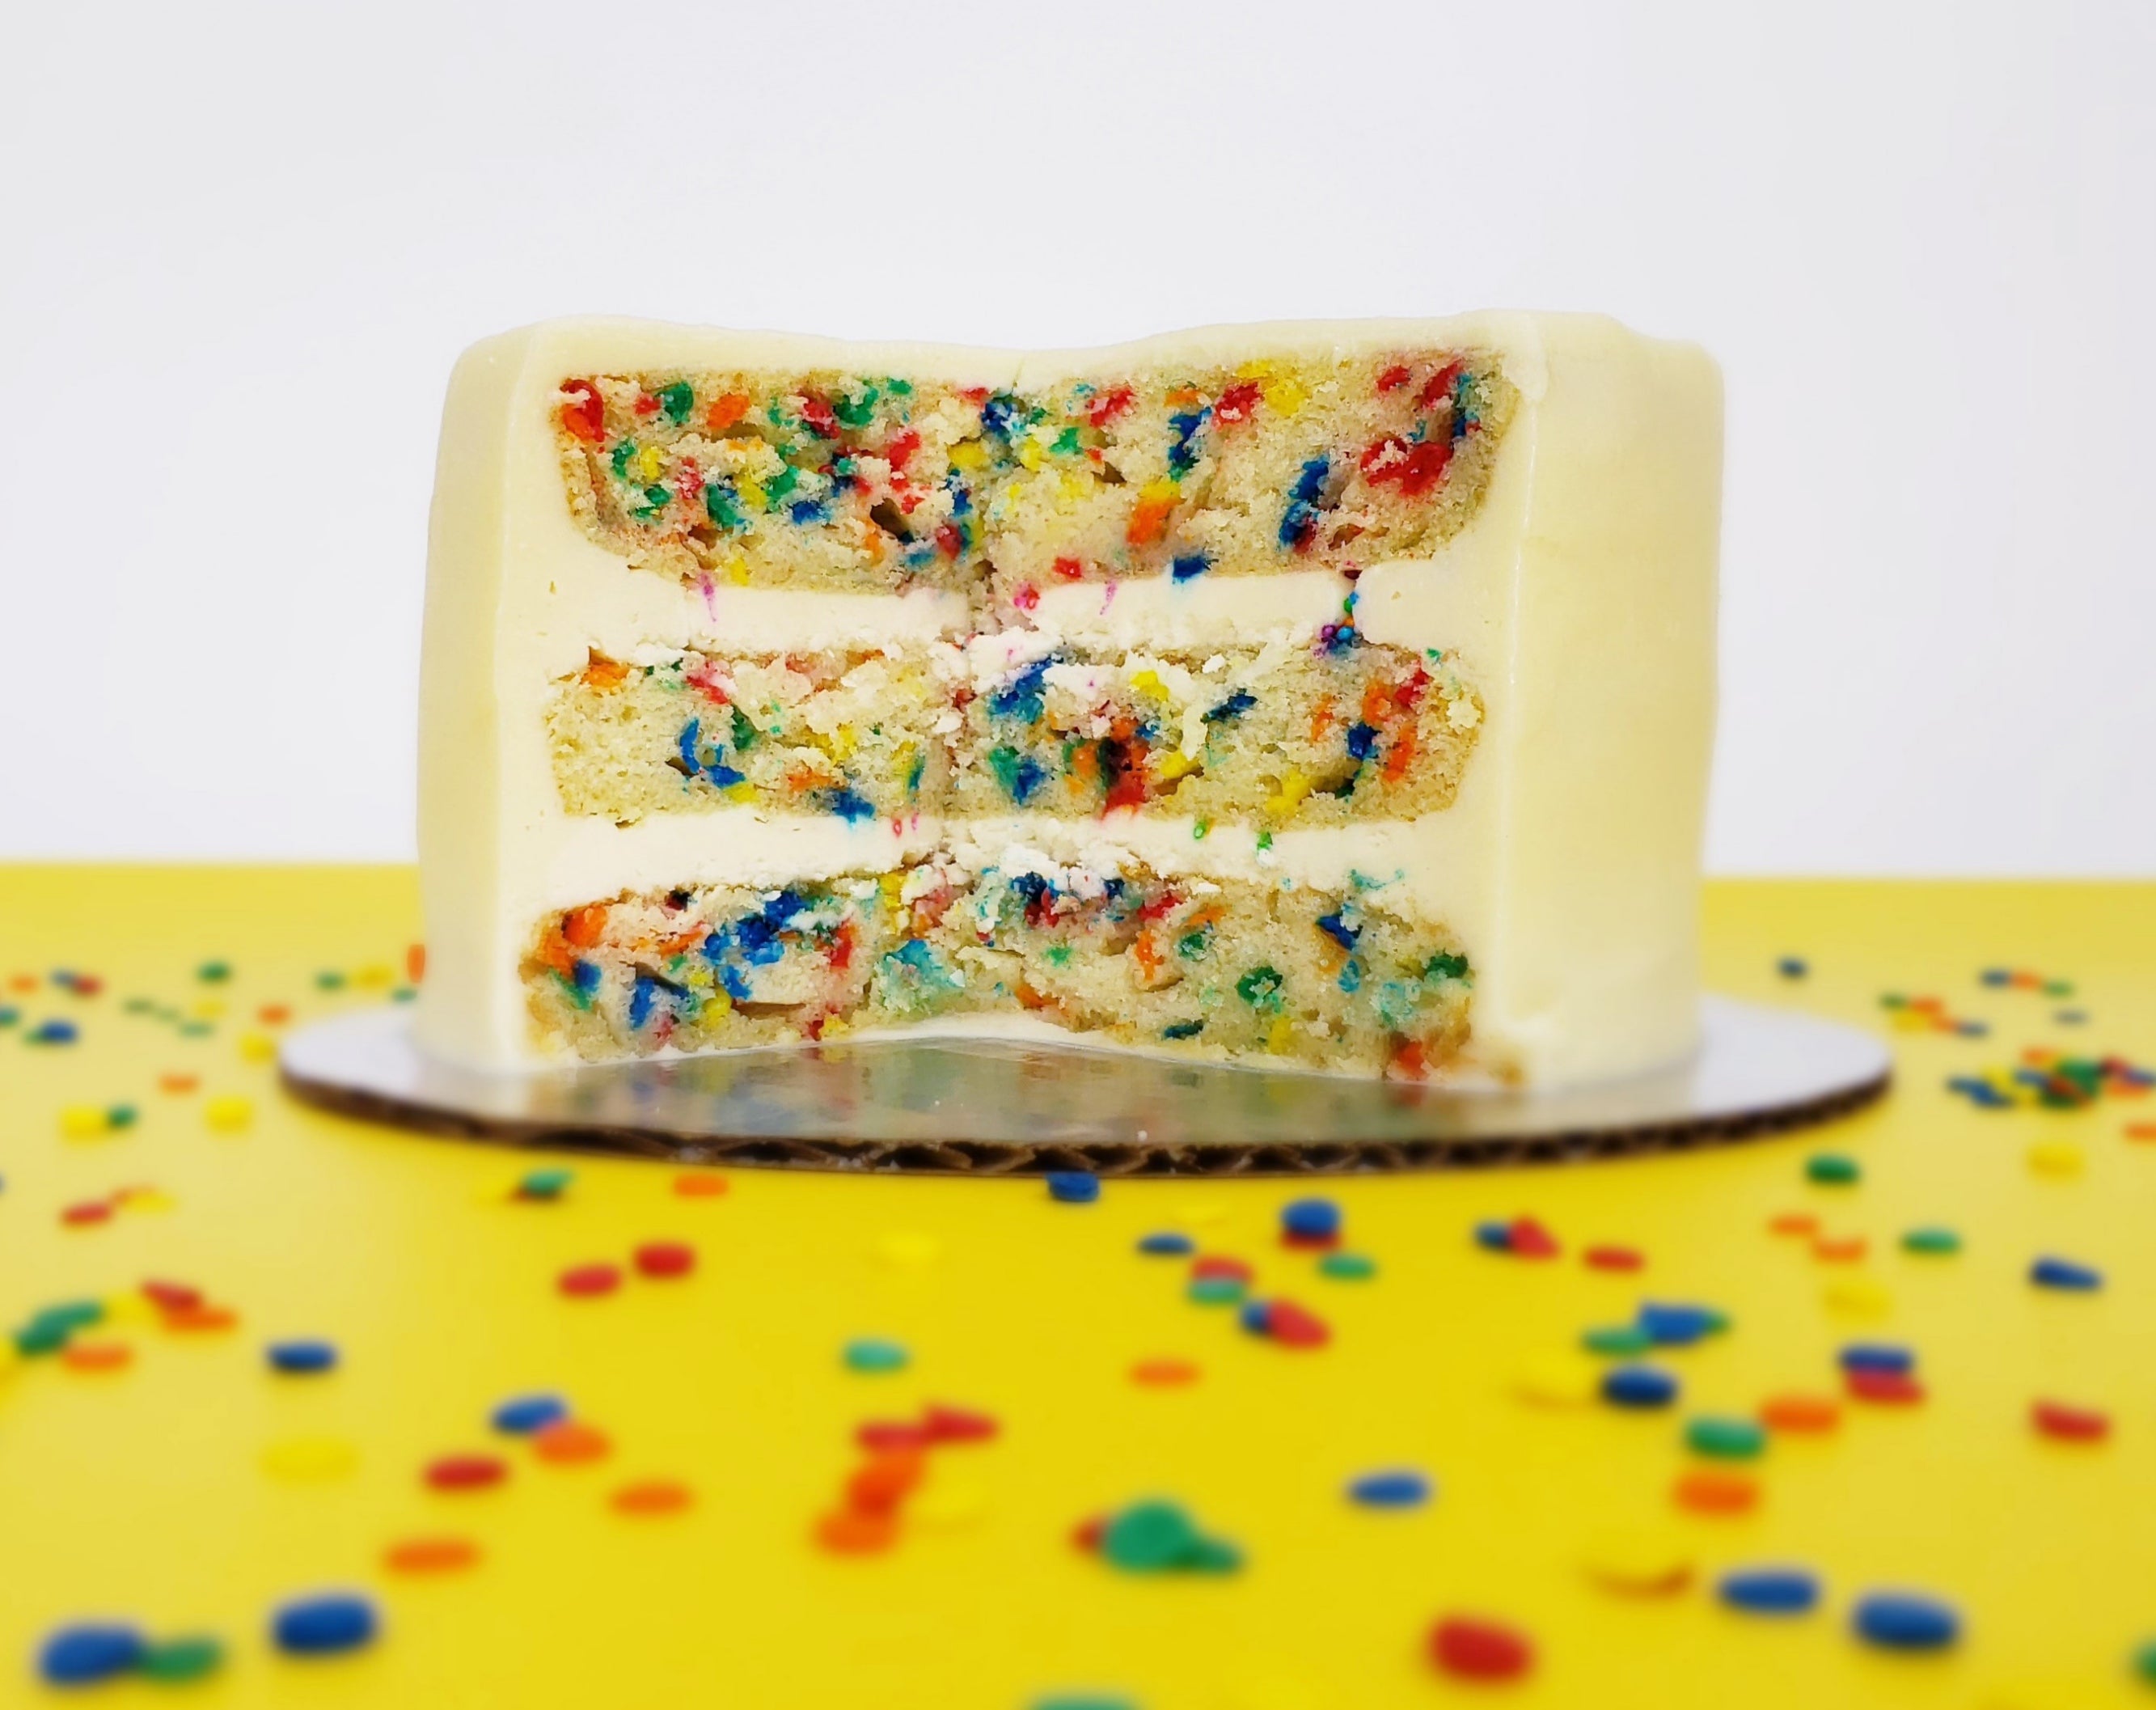 A “Fetti” cake, cut open to reveal the inside layers. A three-layer vanilla cake has tons of bright-colored confetti sprinkles baked into the layers, and white vanilla buttercream frosting separating each layer. The cake looks moist and delicious.